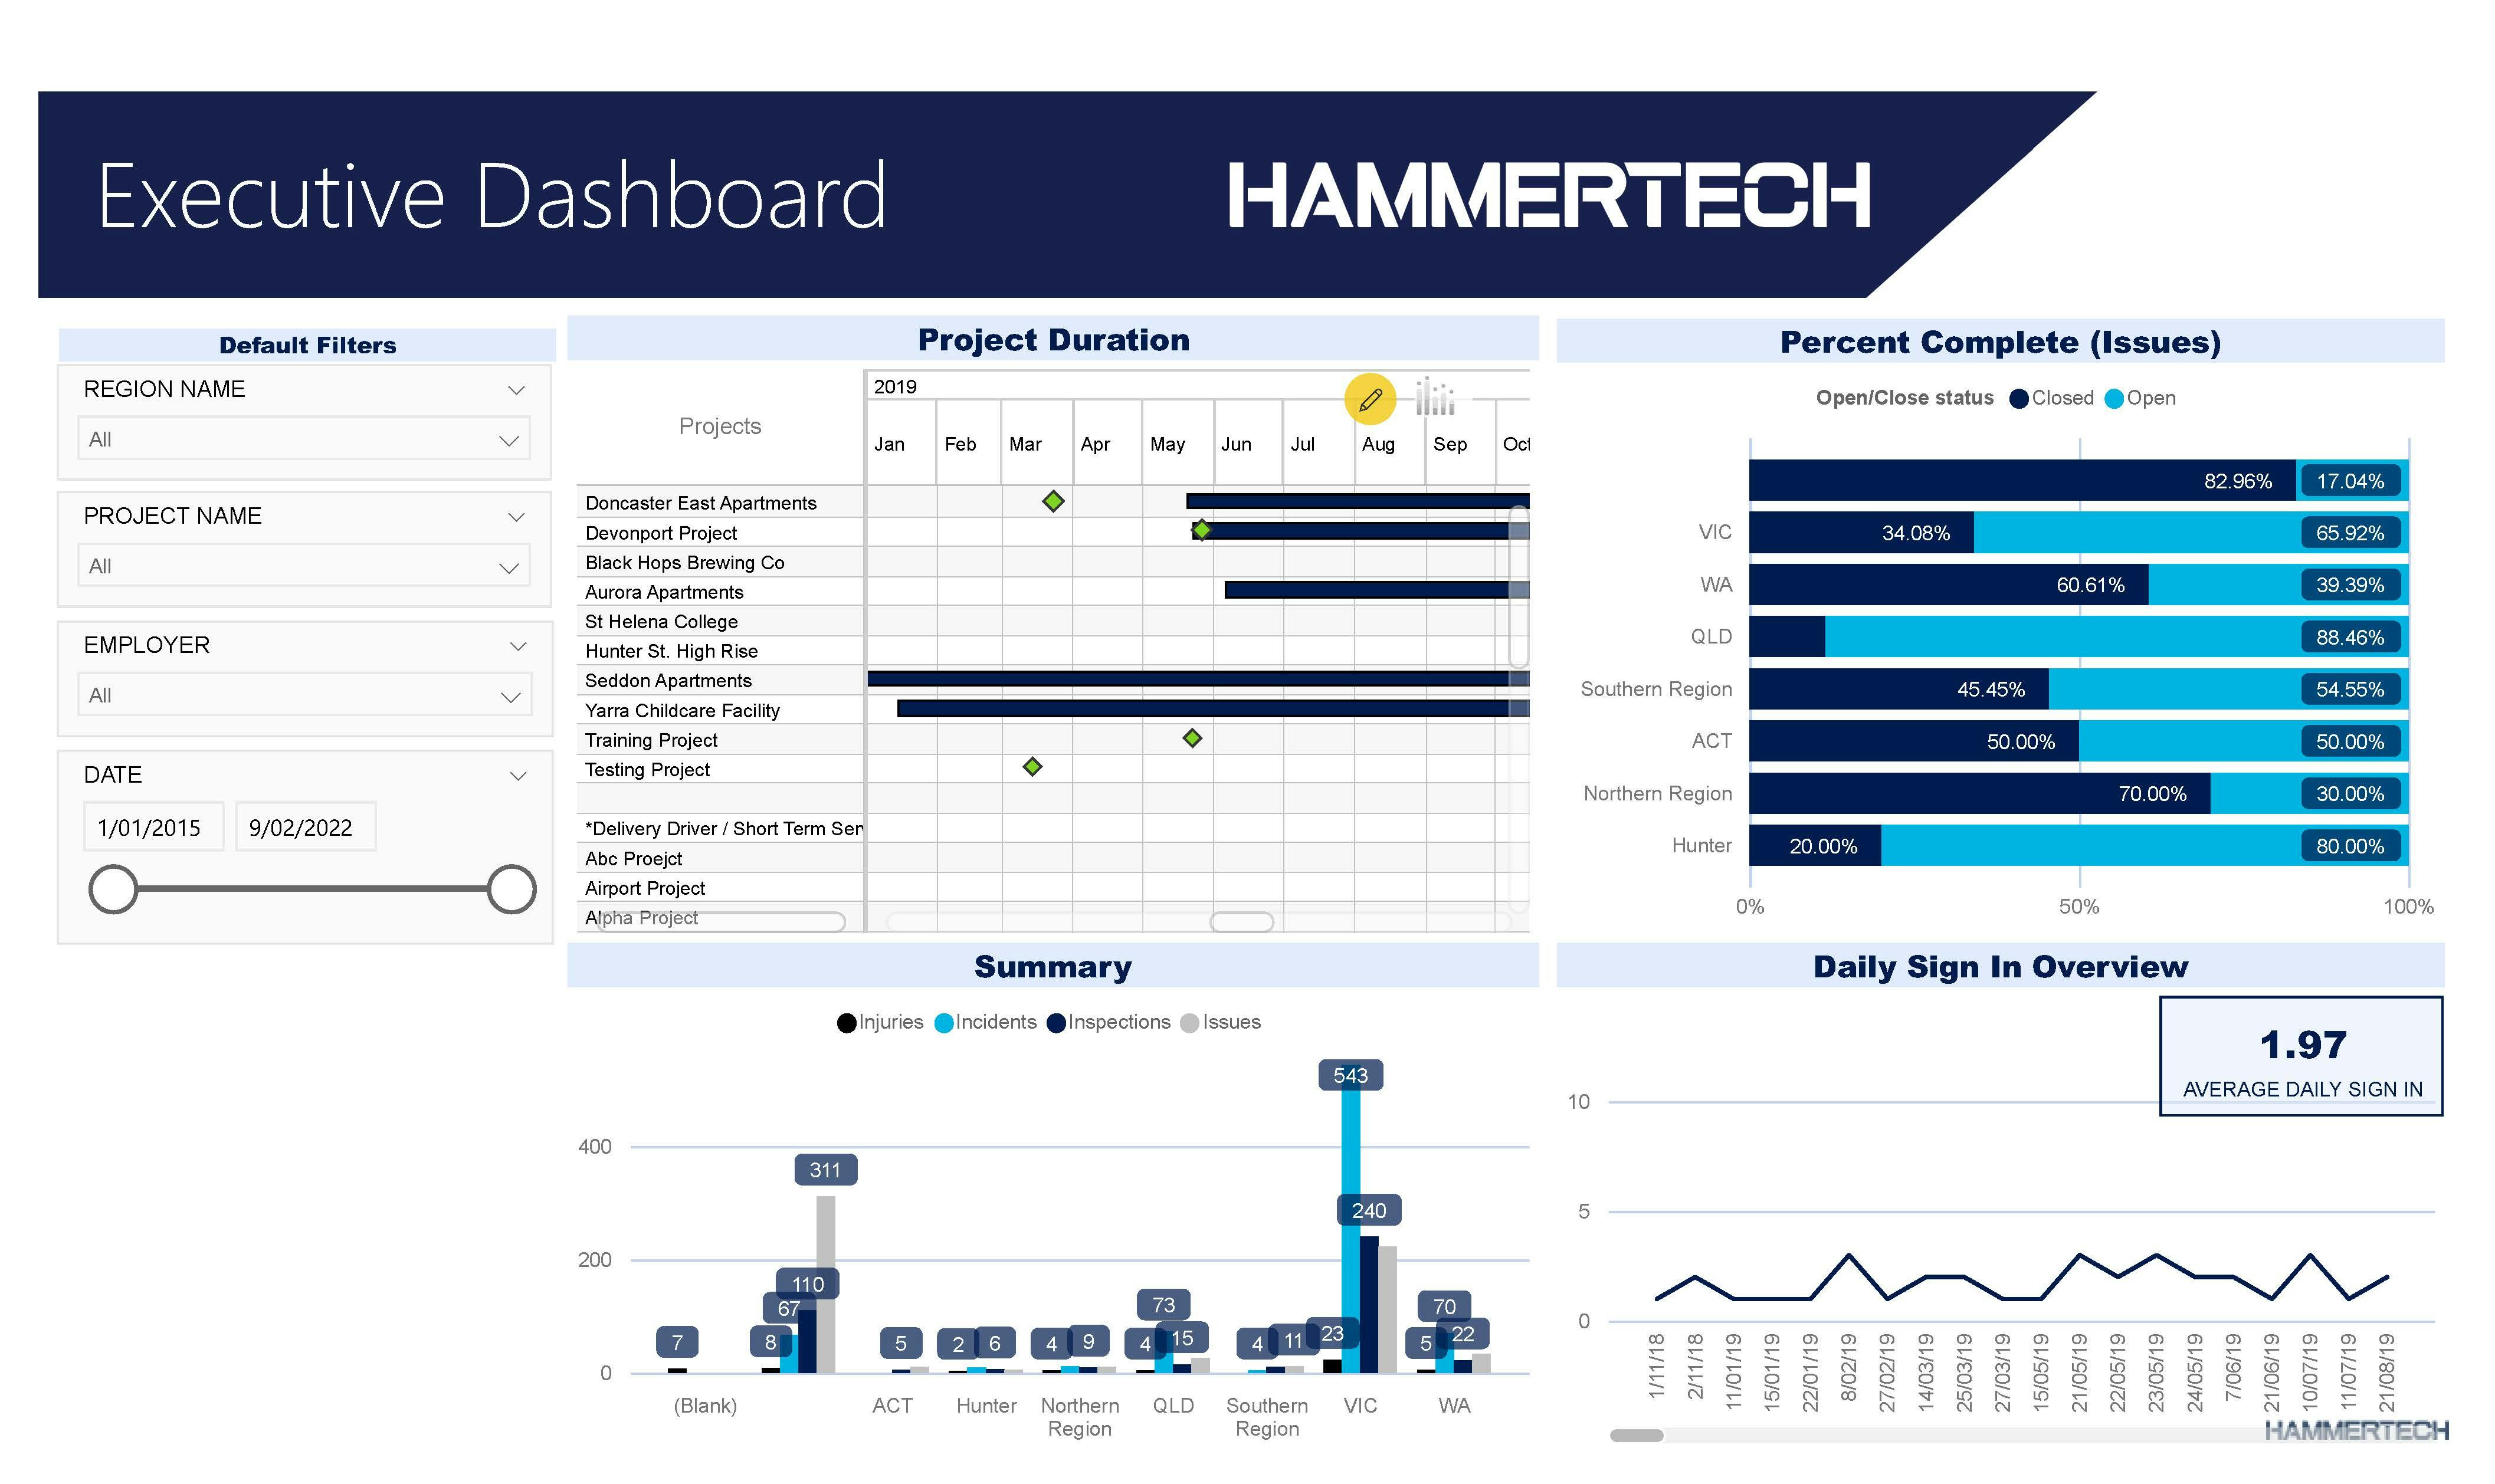 HammerTech Software - Executive Dashboards for Enterprise-wide Compliance, Risk and Safety